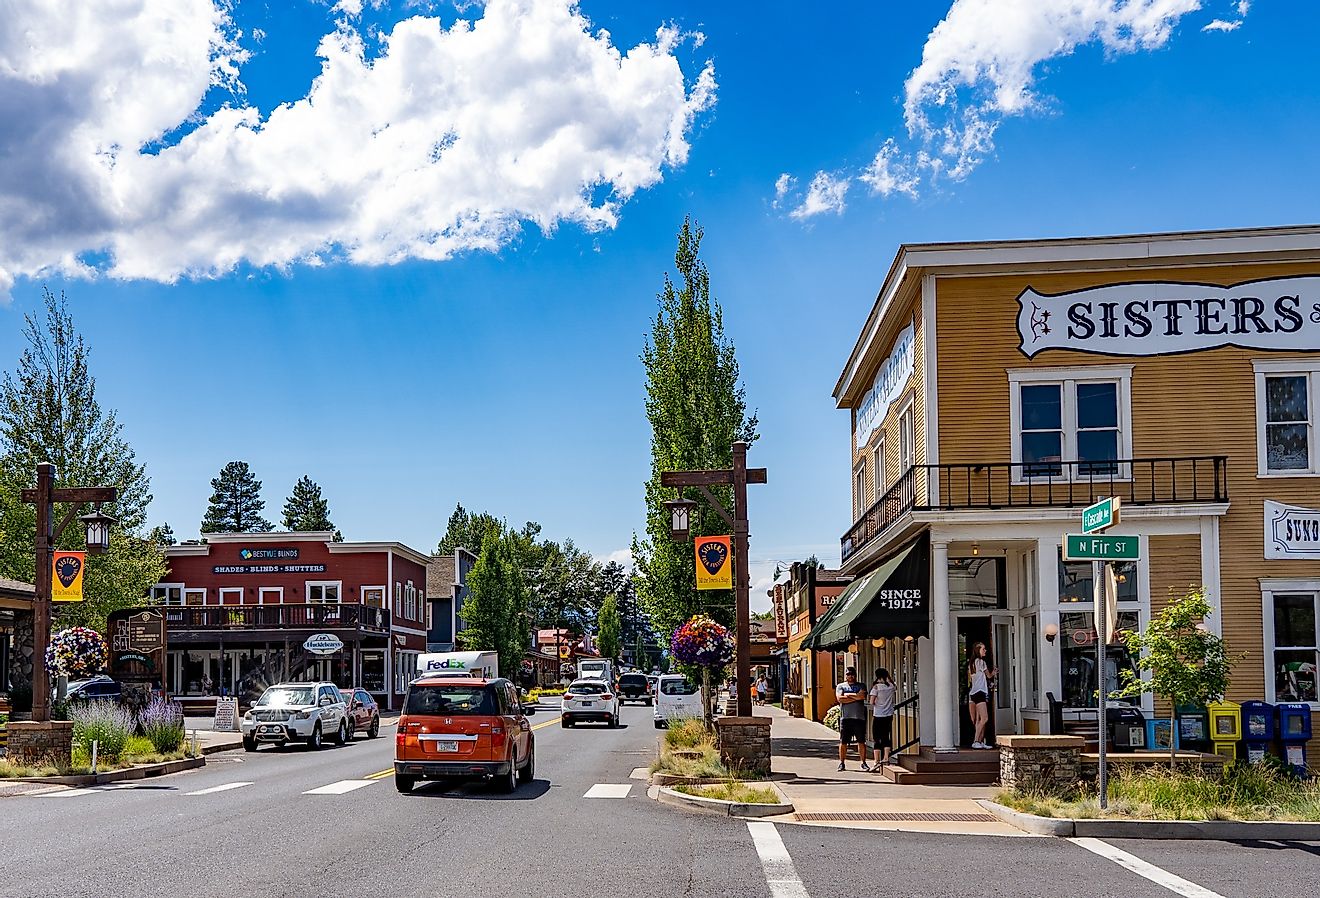 The main street in downtown, Sisters, Oregon in the summer. Image credit Bob Pool via Shutterstock